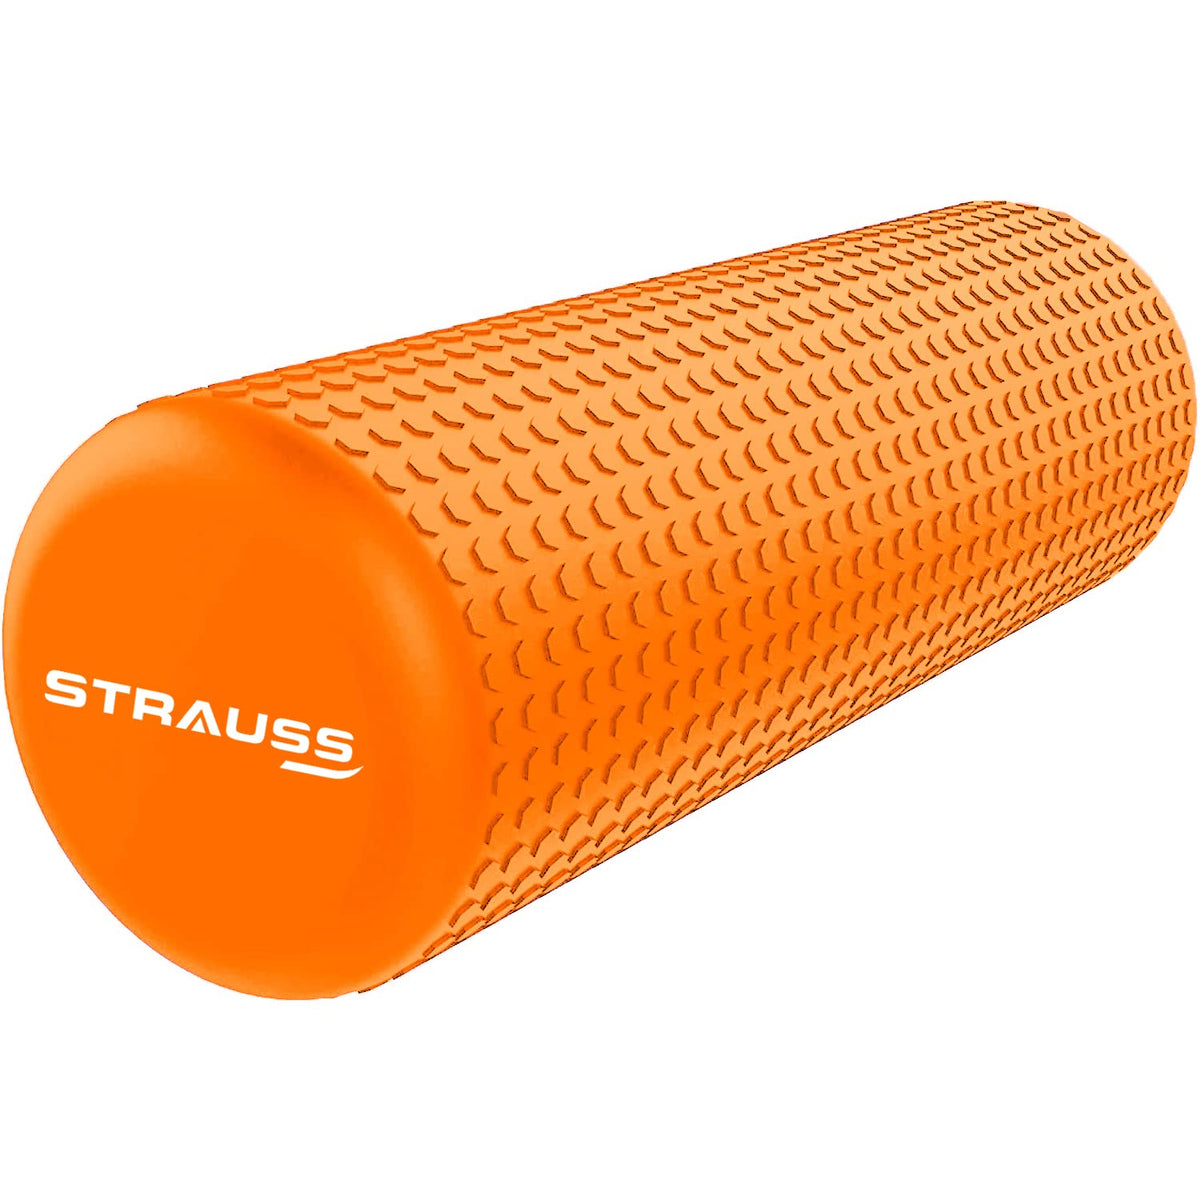 Strauss Yoga Foam Roller | Ideal For Exercise, Muscle Recovery, Physiotherapy, Pain Relief & Myofascial | Deep Tissue Massage Roller 30 Cm, (Orange)